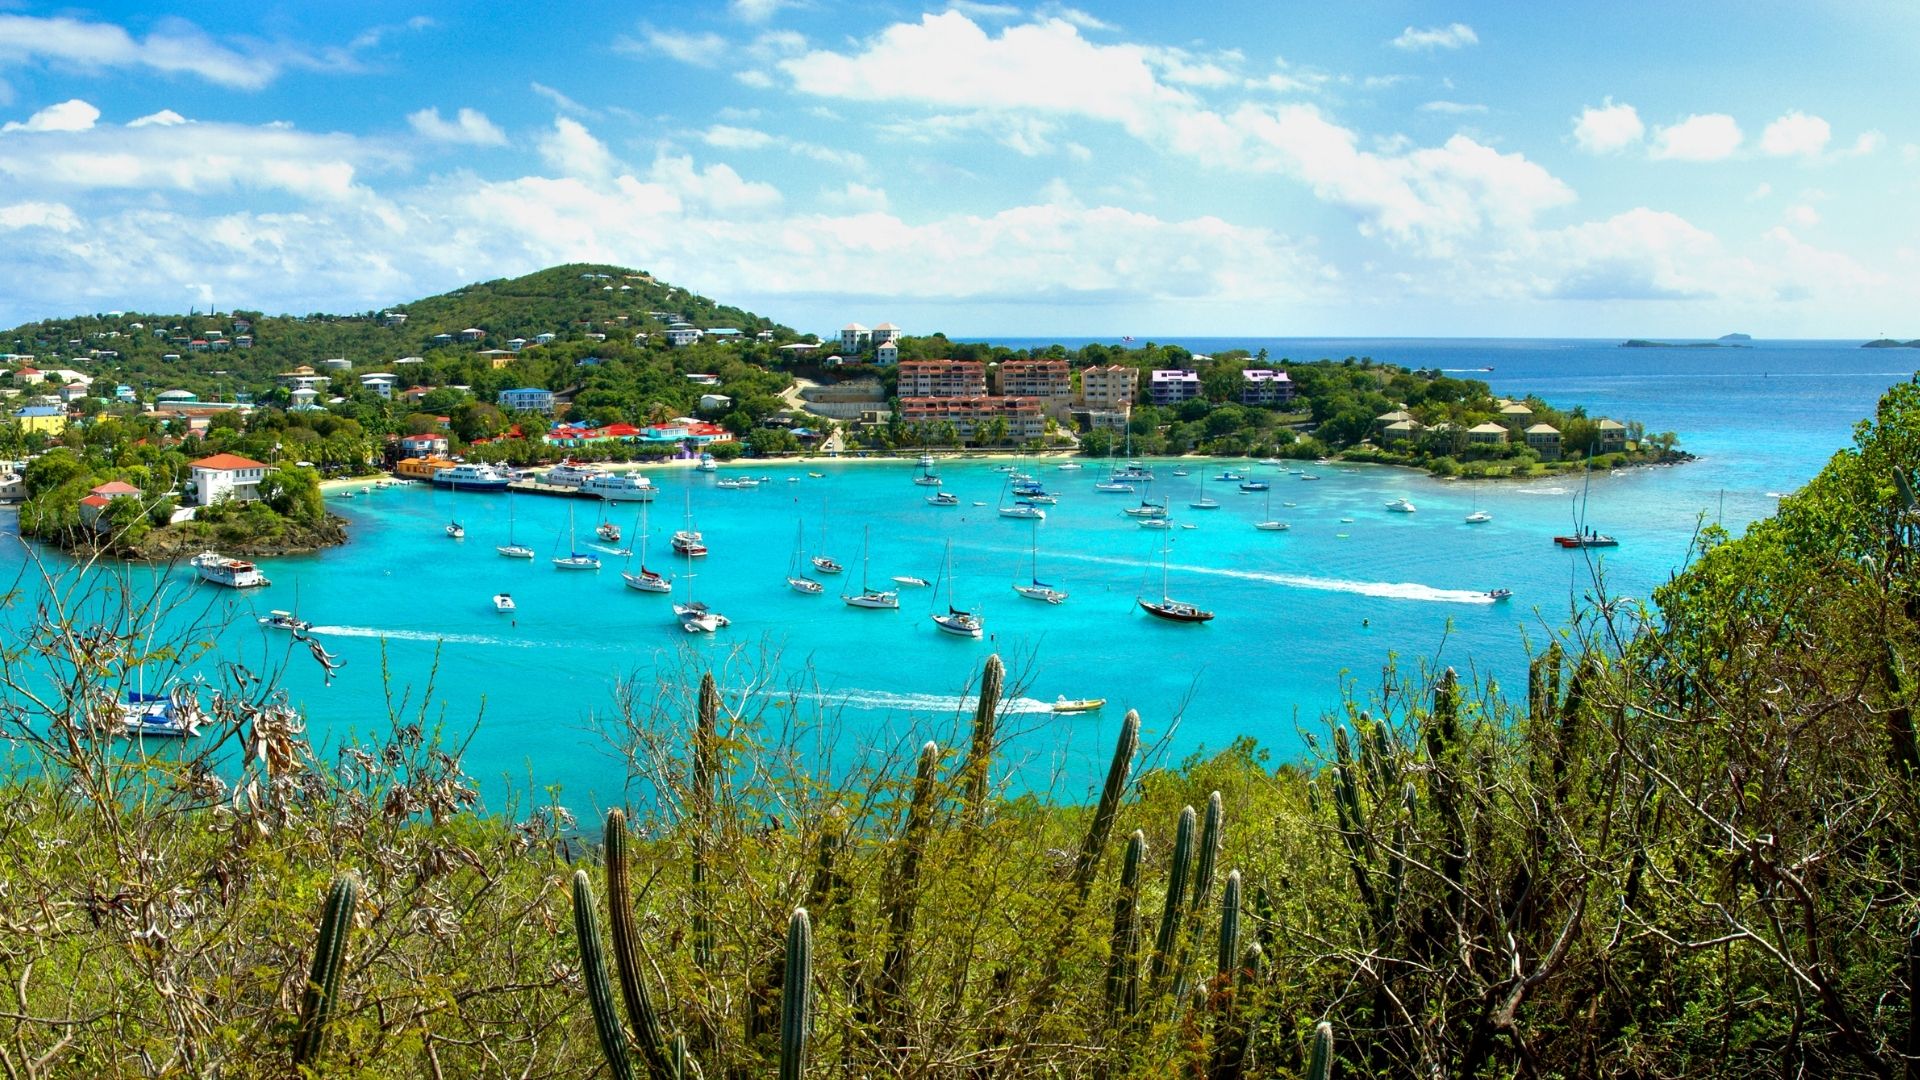 USVI best vacation spots for couples on a beach